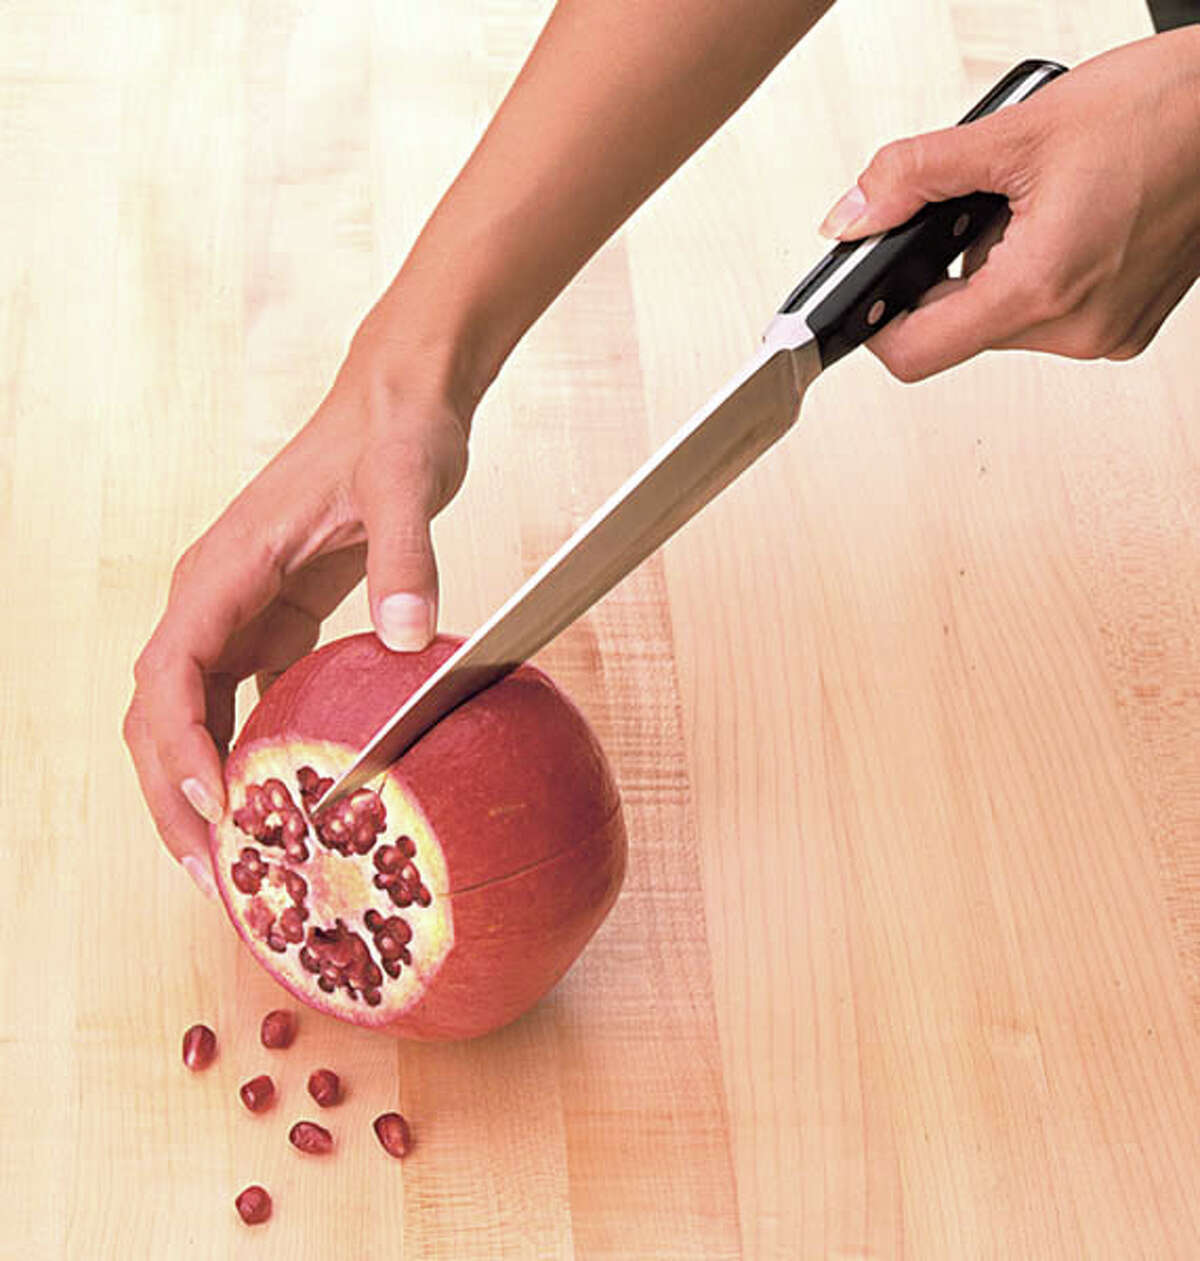 How to extract pomegranate seeds: Step 1: Cut off the crown; cut the pomegranate into sections. (Photo courtesy of the Pomegranate Council.)